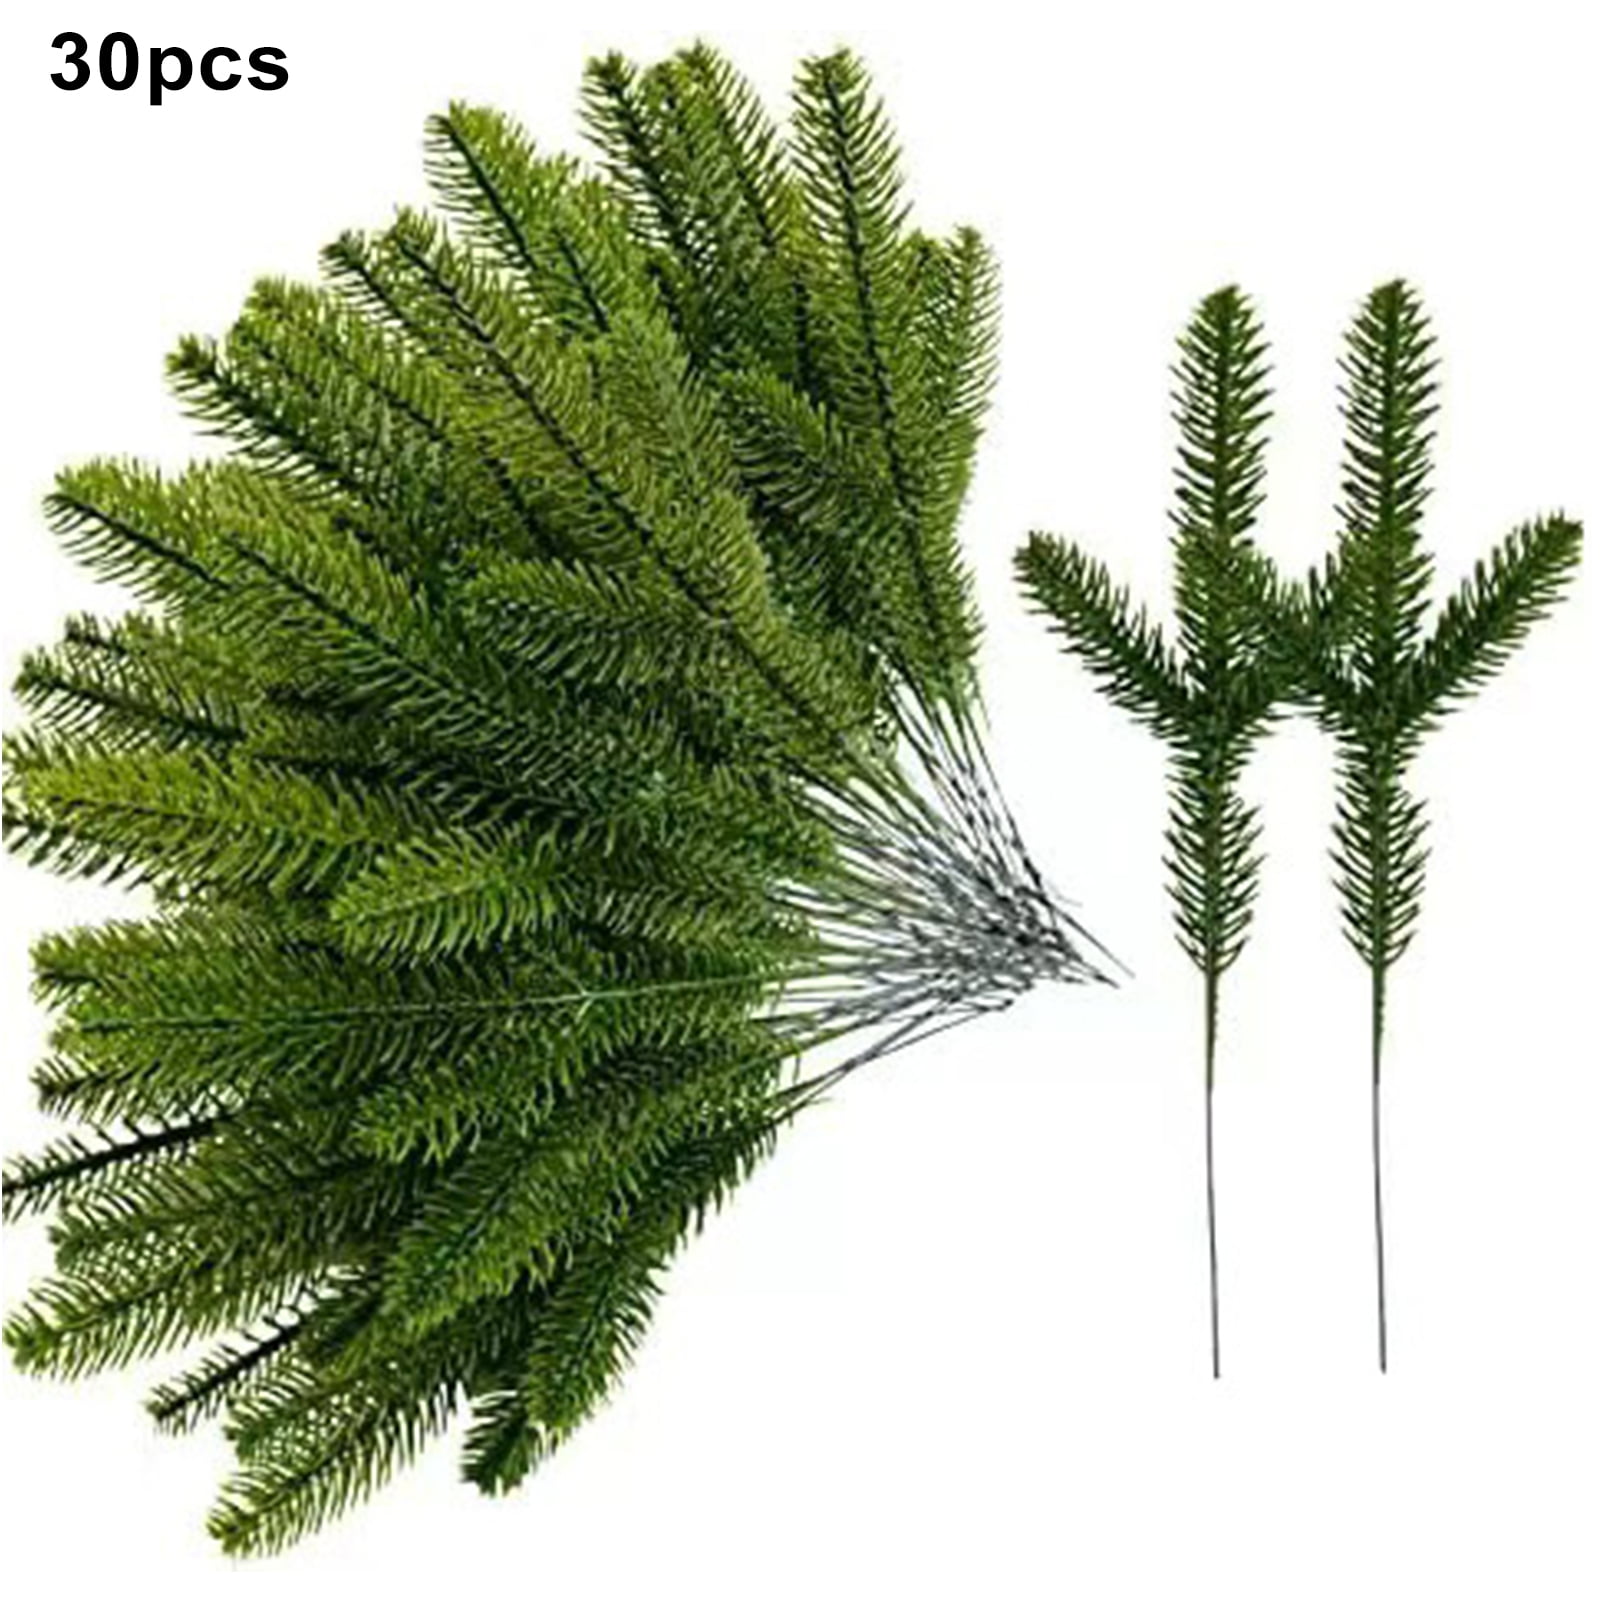 wirlsweal Long Lasting Faux Pine Branch 30pcs Realistic Artificial Pine  Branches for Diy Crafts Home Decor Durable Faux Pine Needles for Christmas  Wreaths 